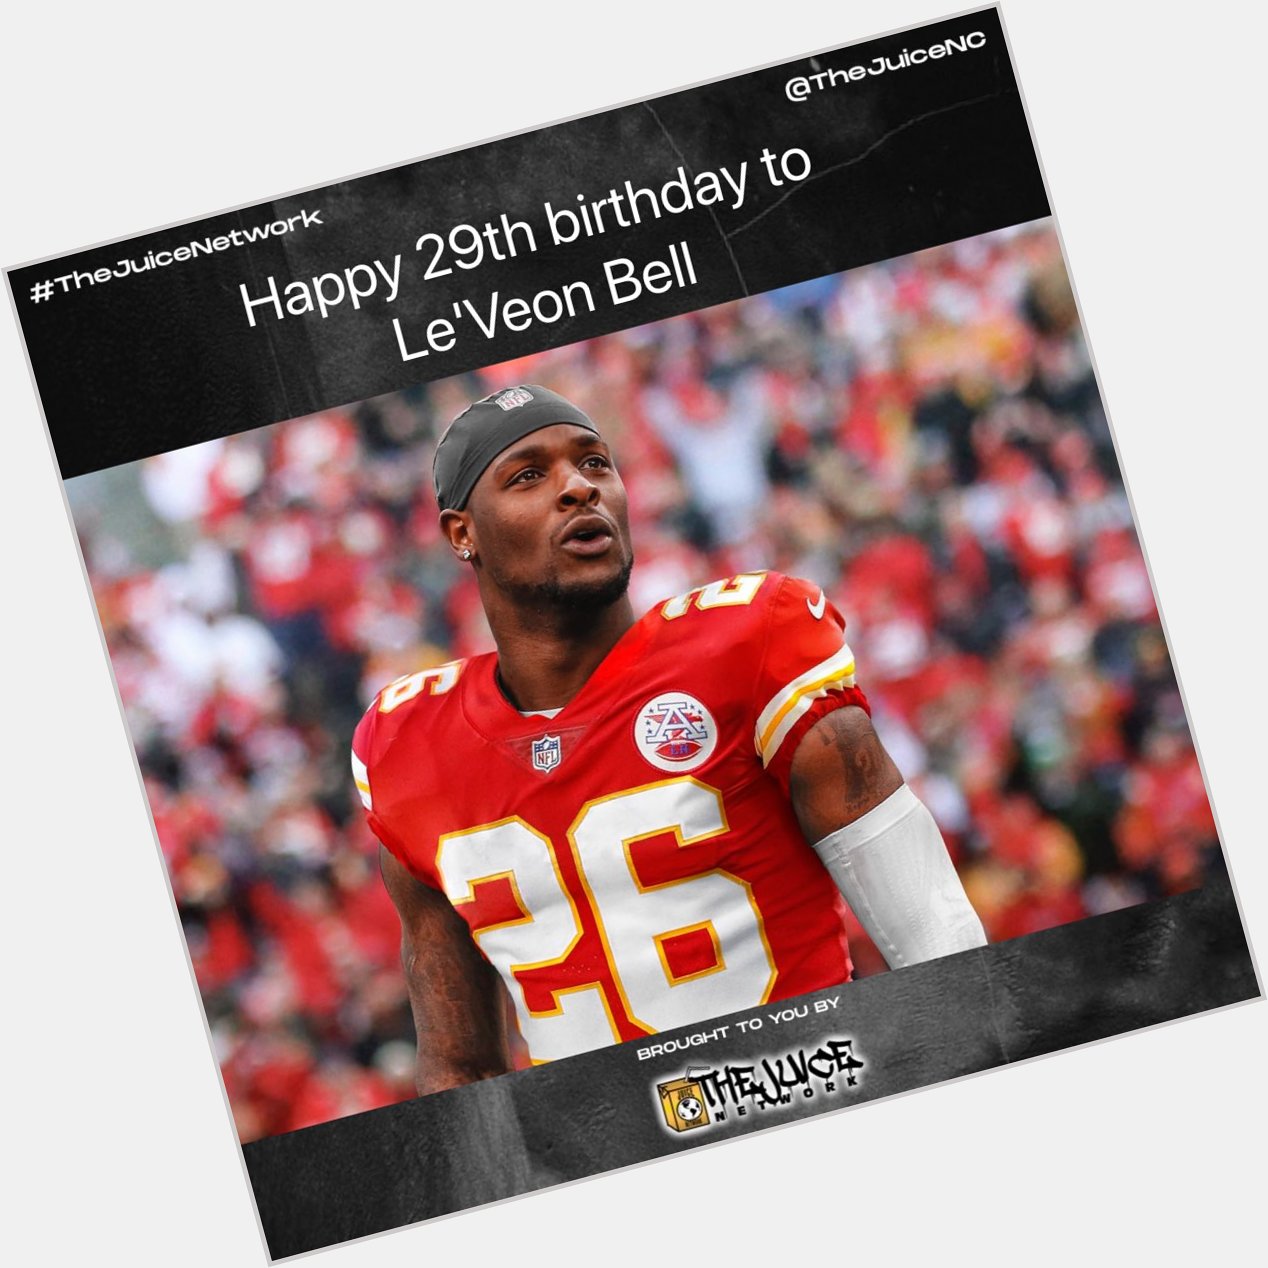 Happy 29th birthday to Le Veon Bell!    